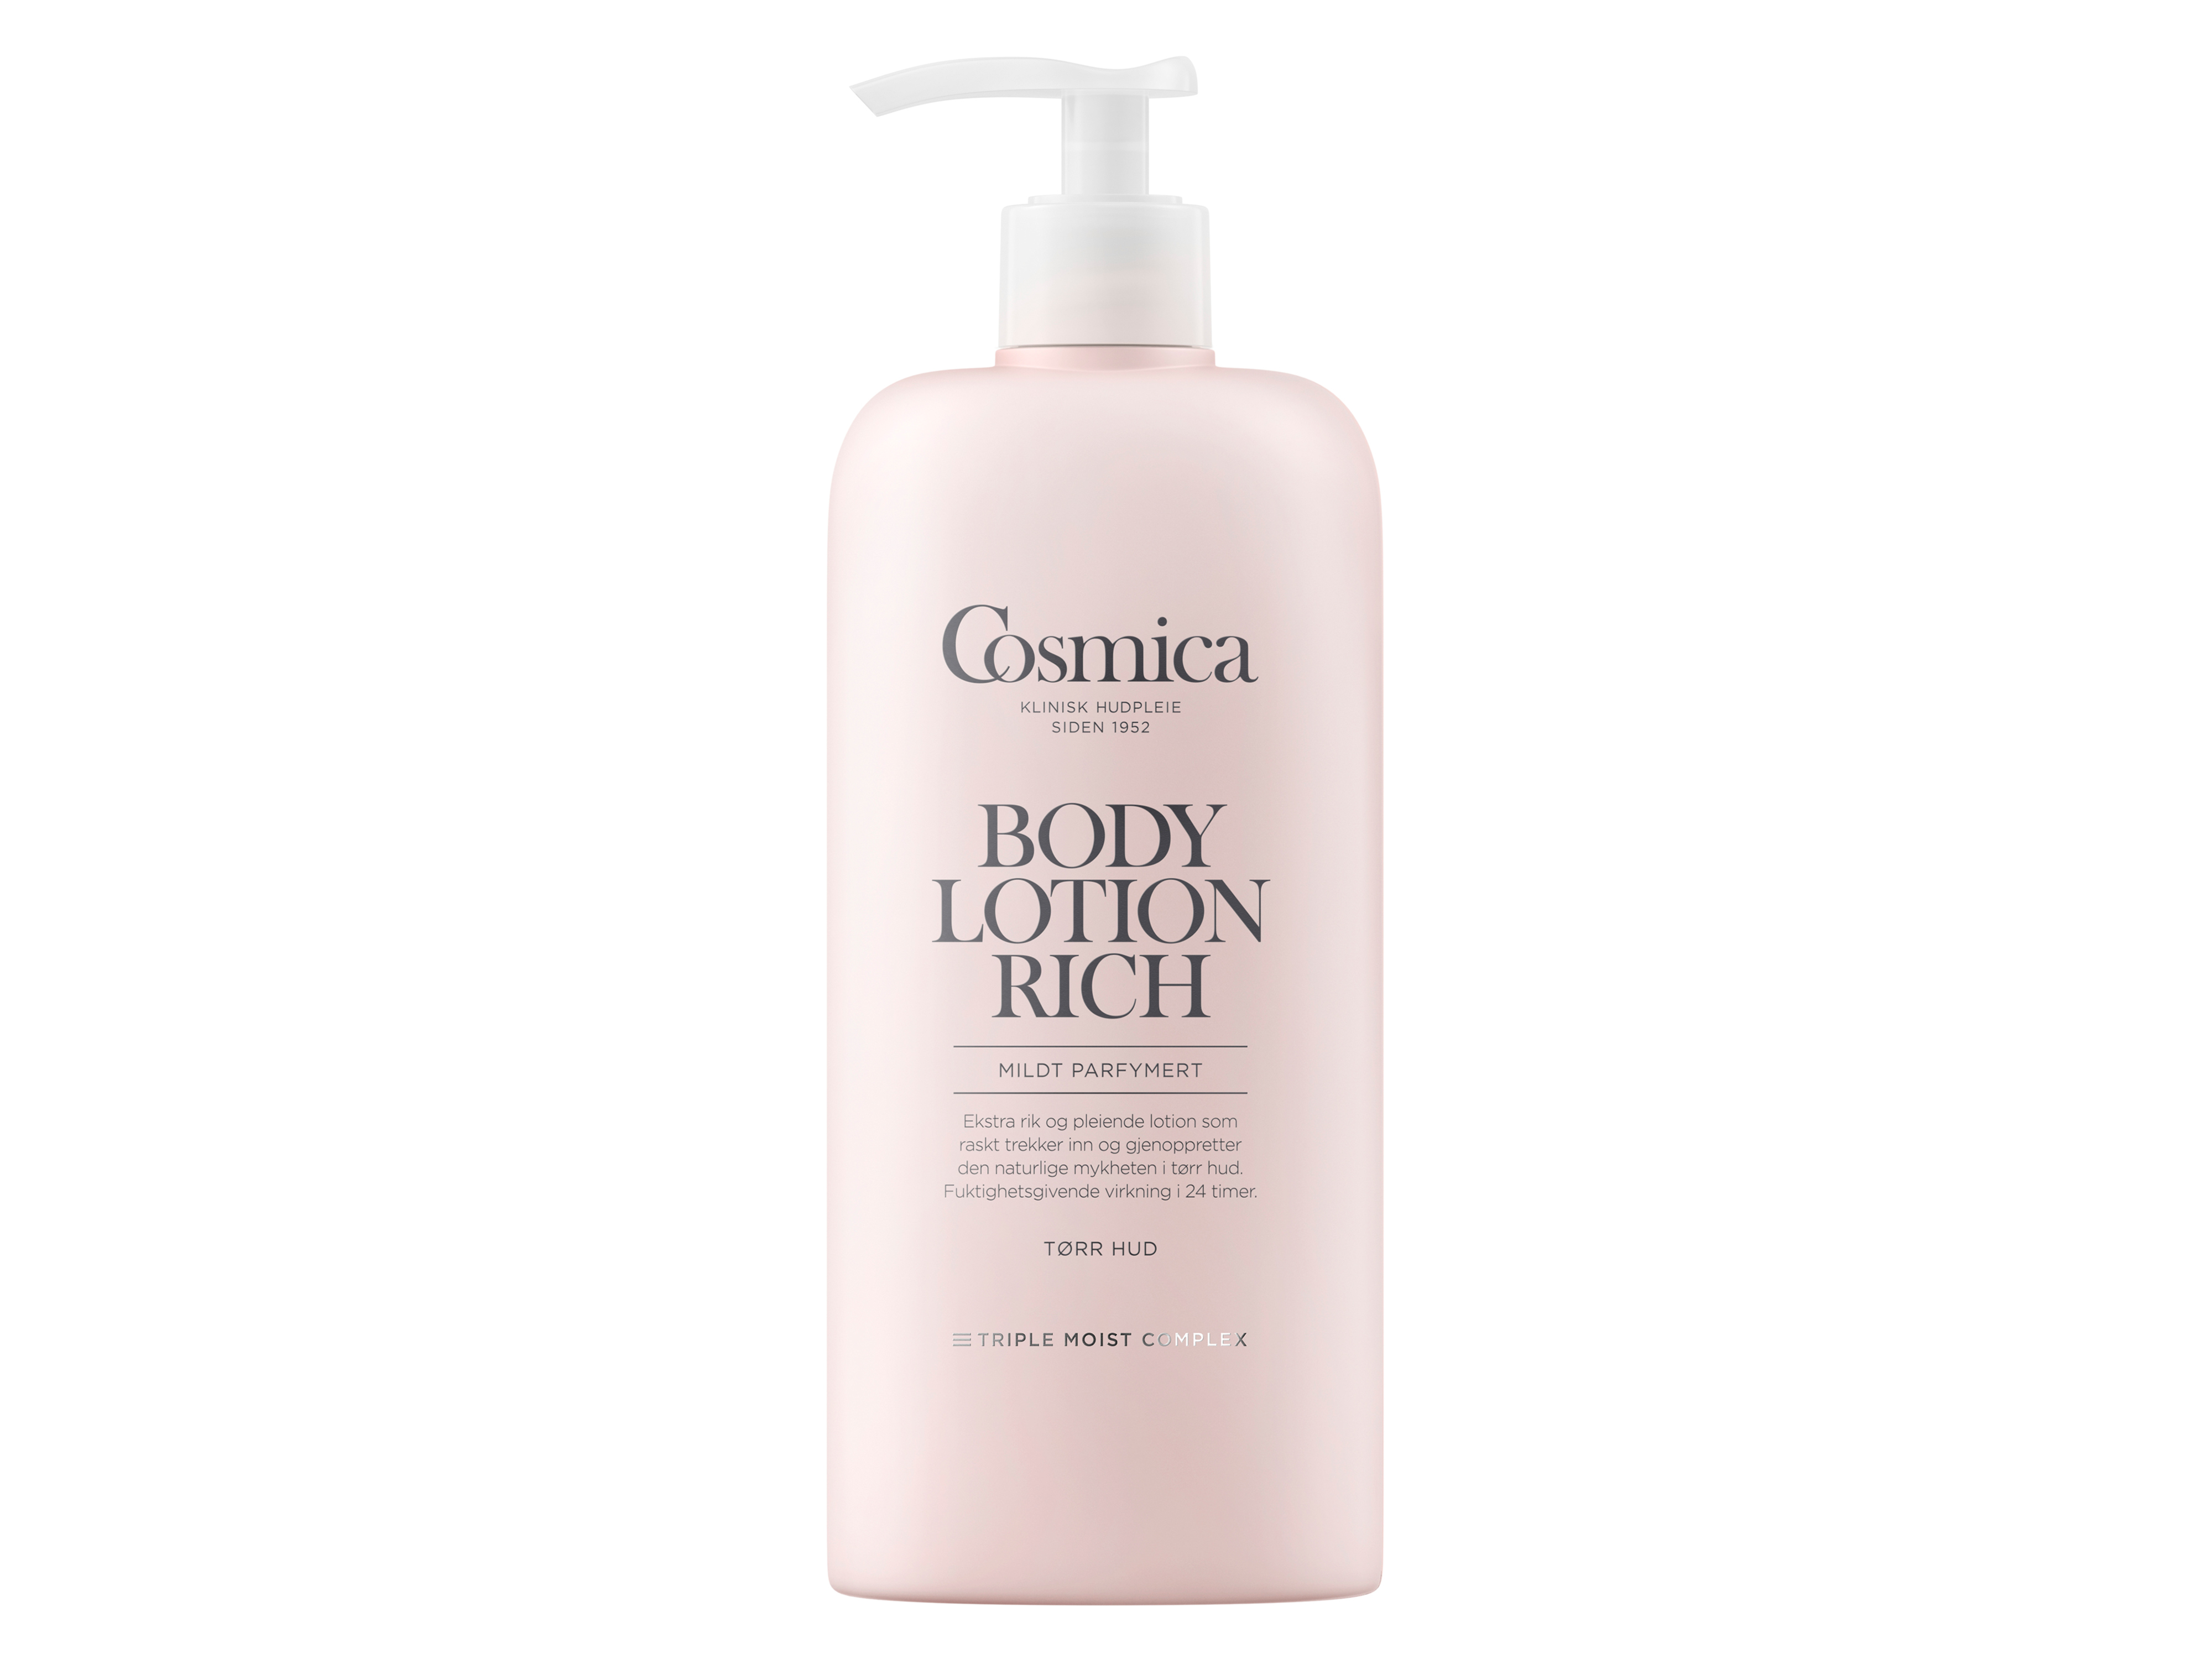 Cosmica Body Lotion Rich med parfyme, 400 ml